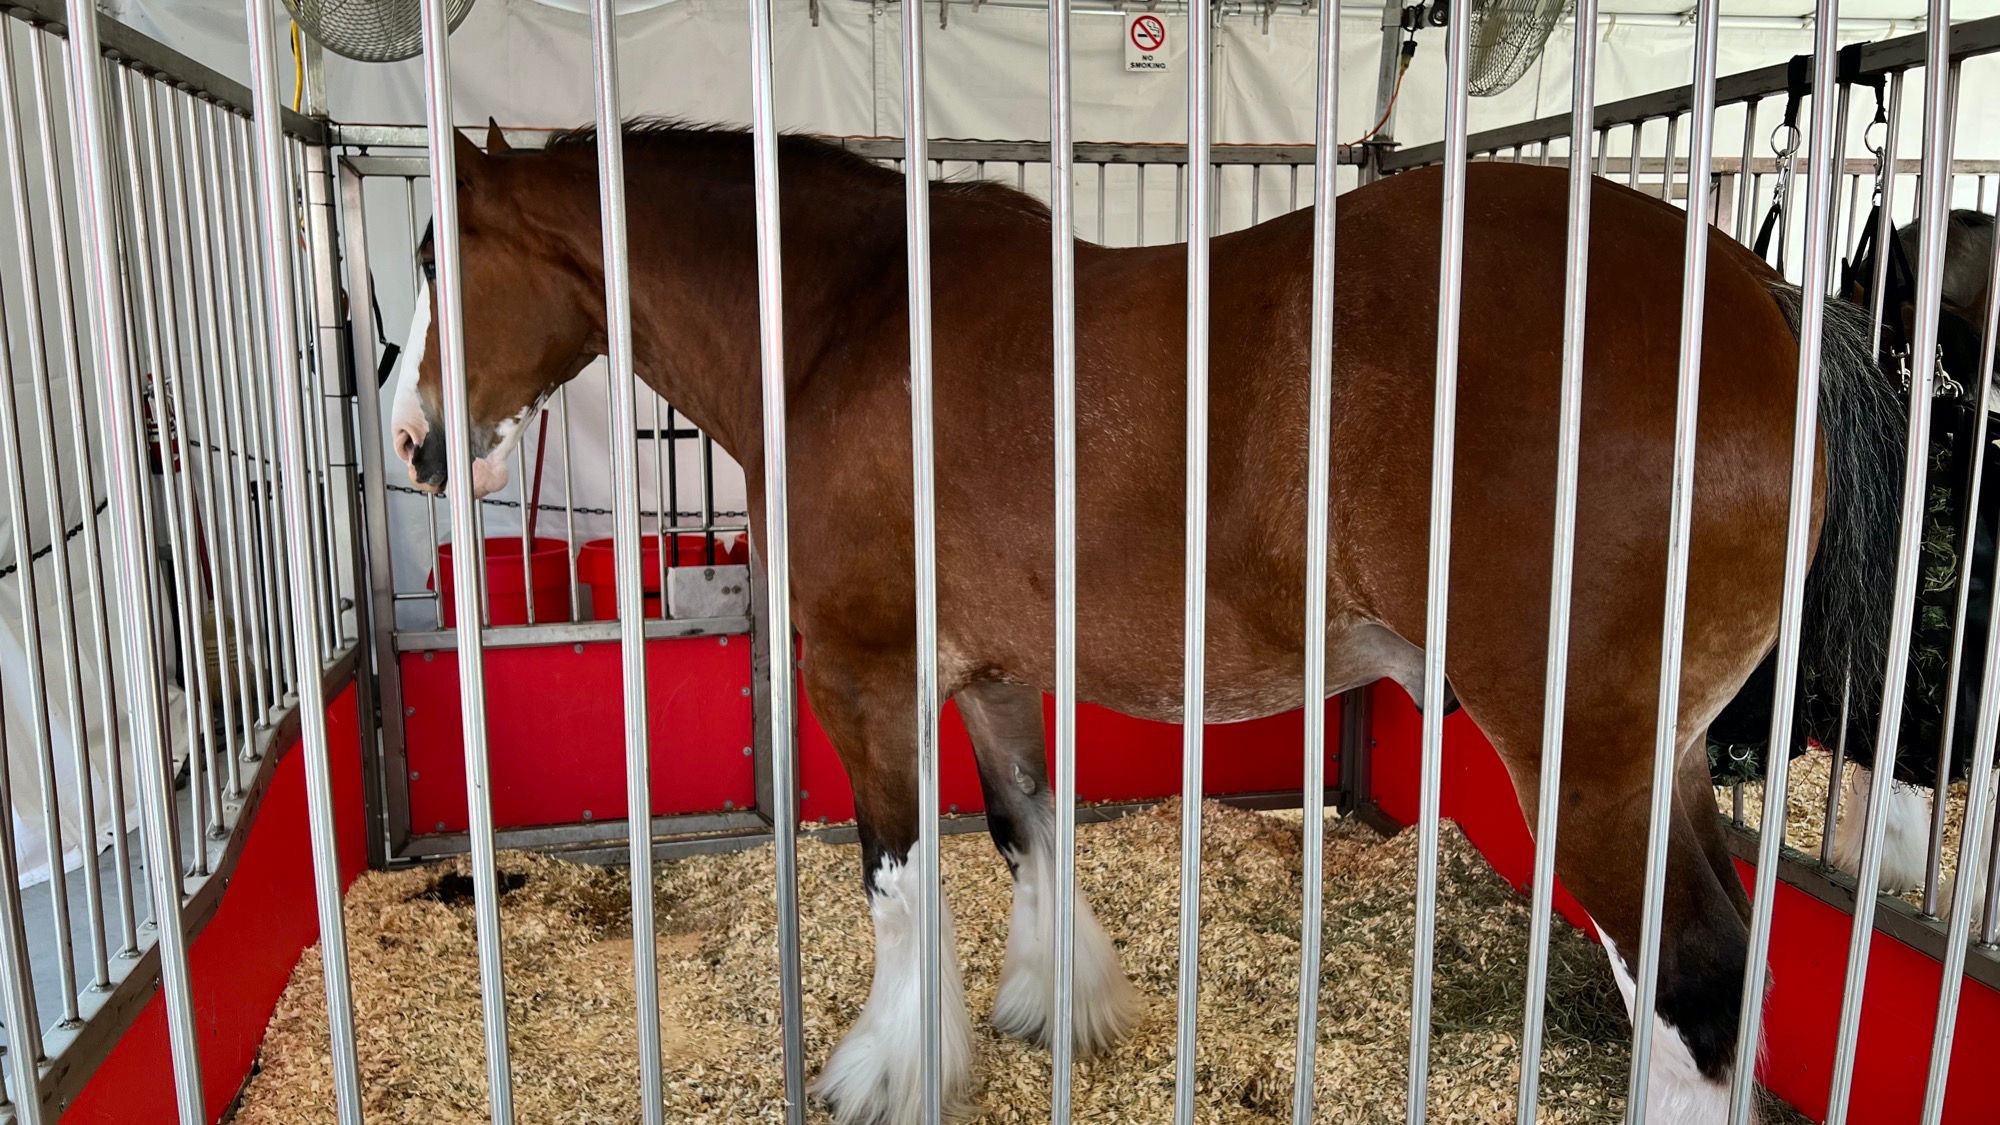 Budweiser Clydesdales 4